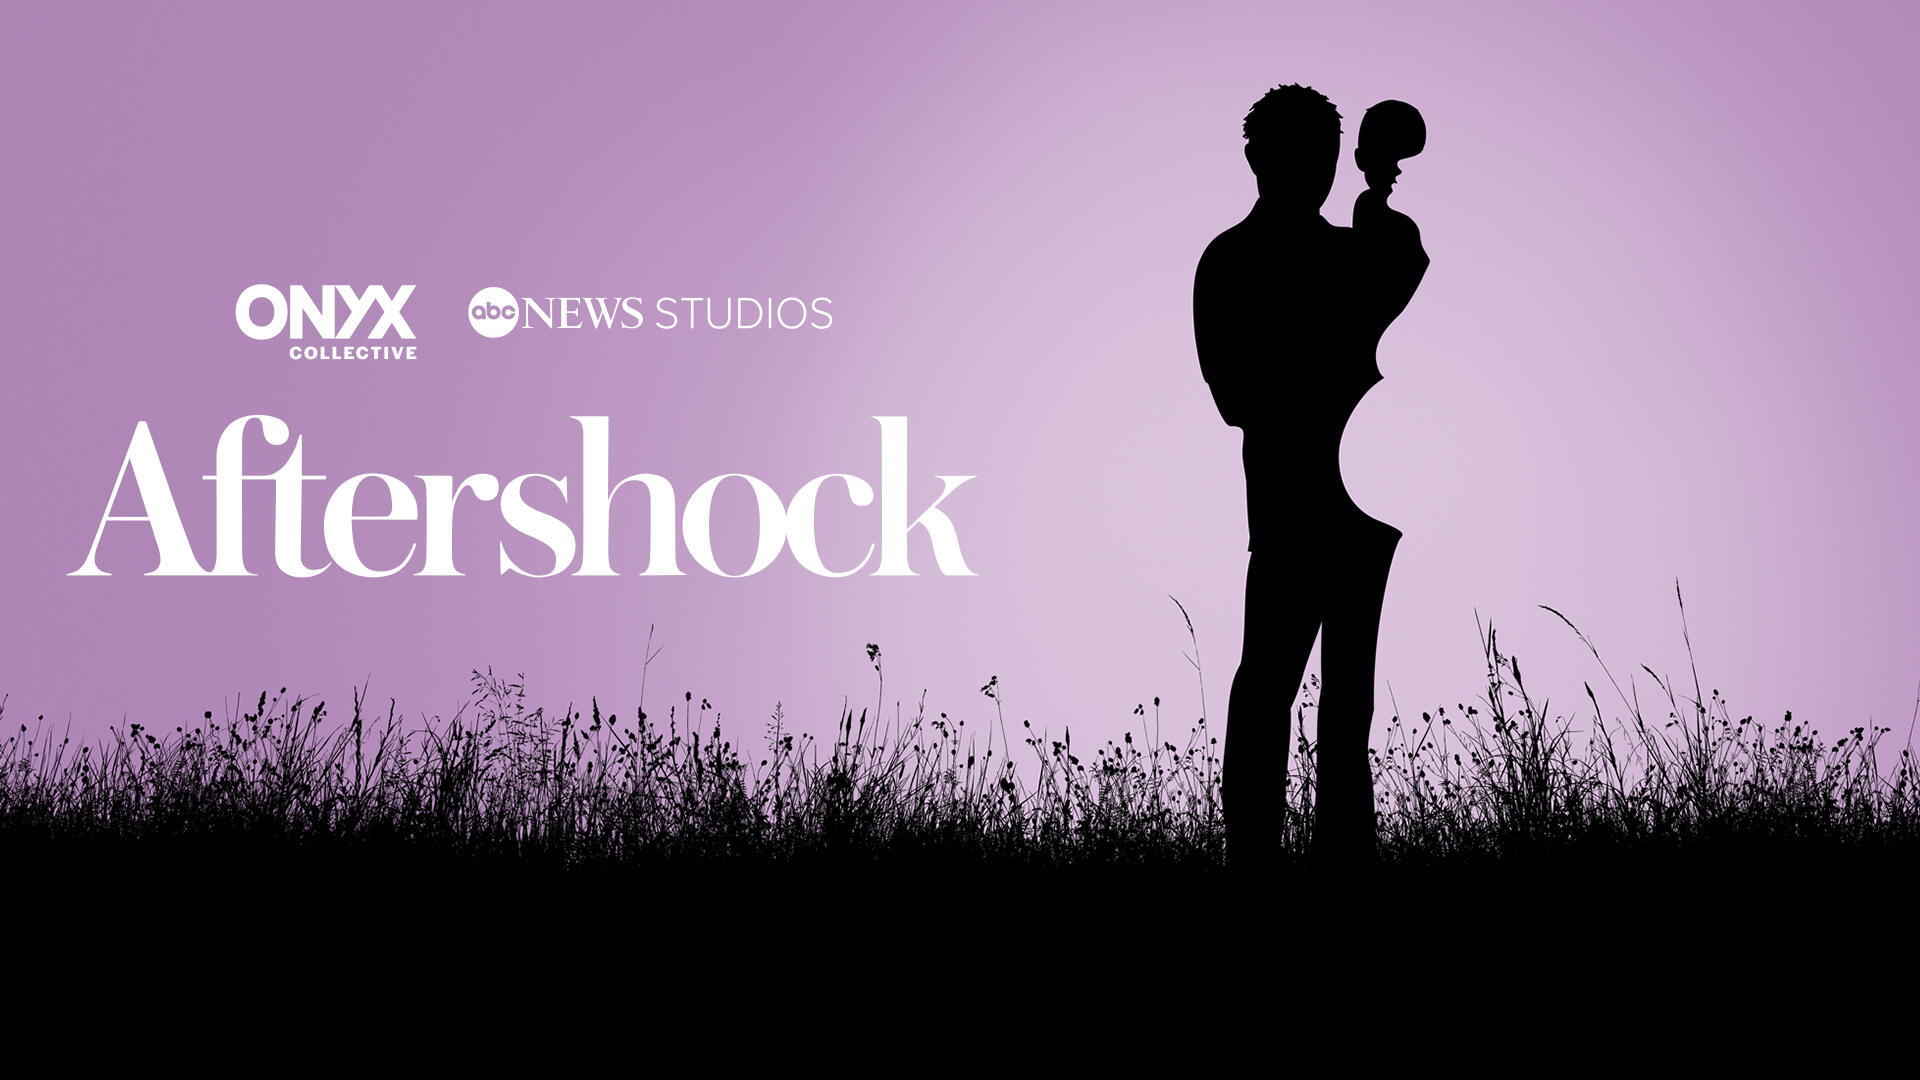 Aftershock -- Following the deaths of two young women due to childbirth complications, two bereaved families galvanize activists, birth-workers and physicians to reckon with one of the most pressing American crises today: the US maternal health crisis. (Courtesy of Hulu)